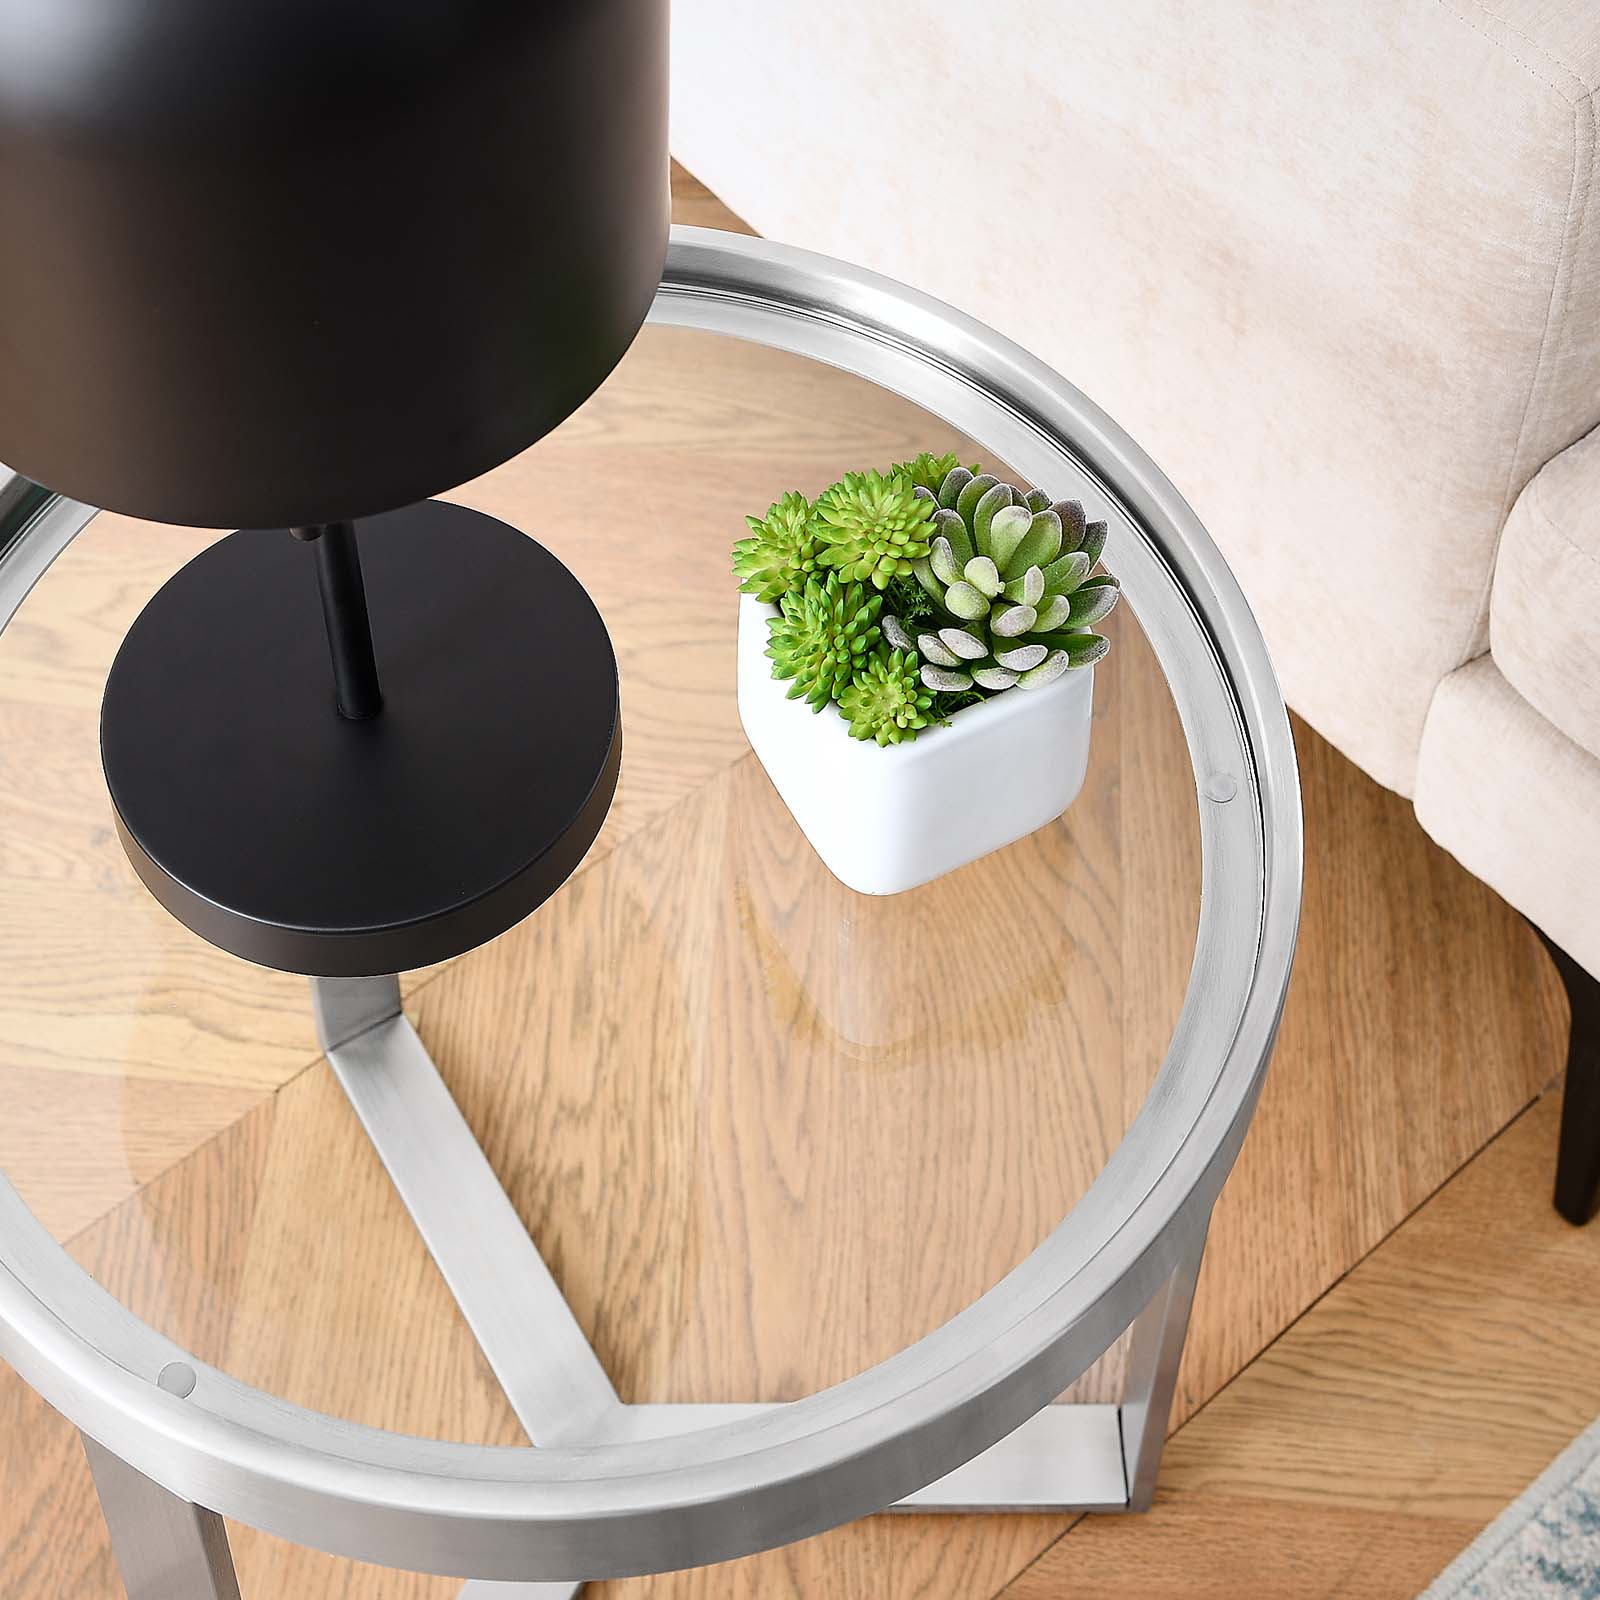 Relay 17.5" Side Table